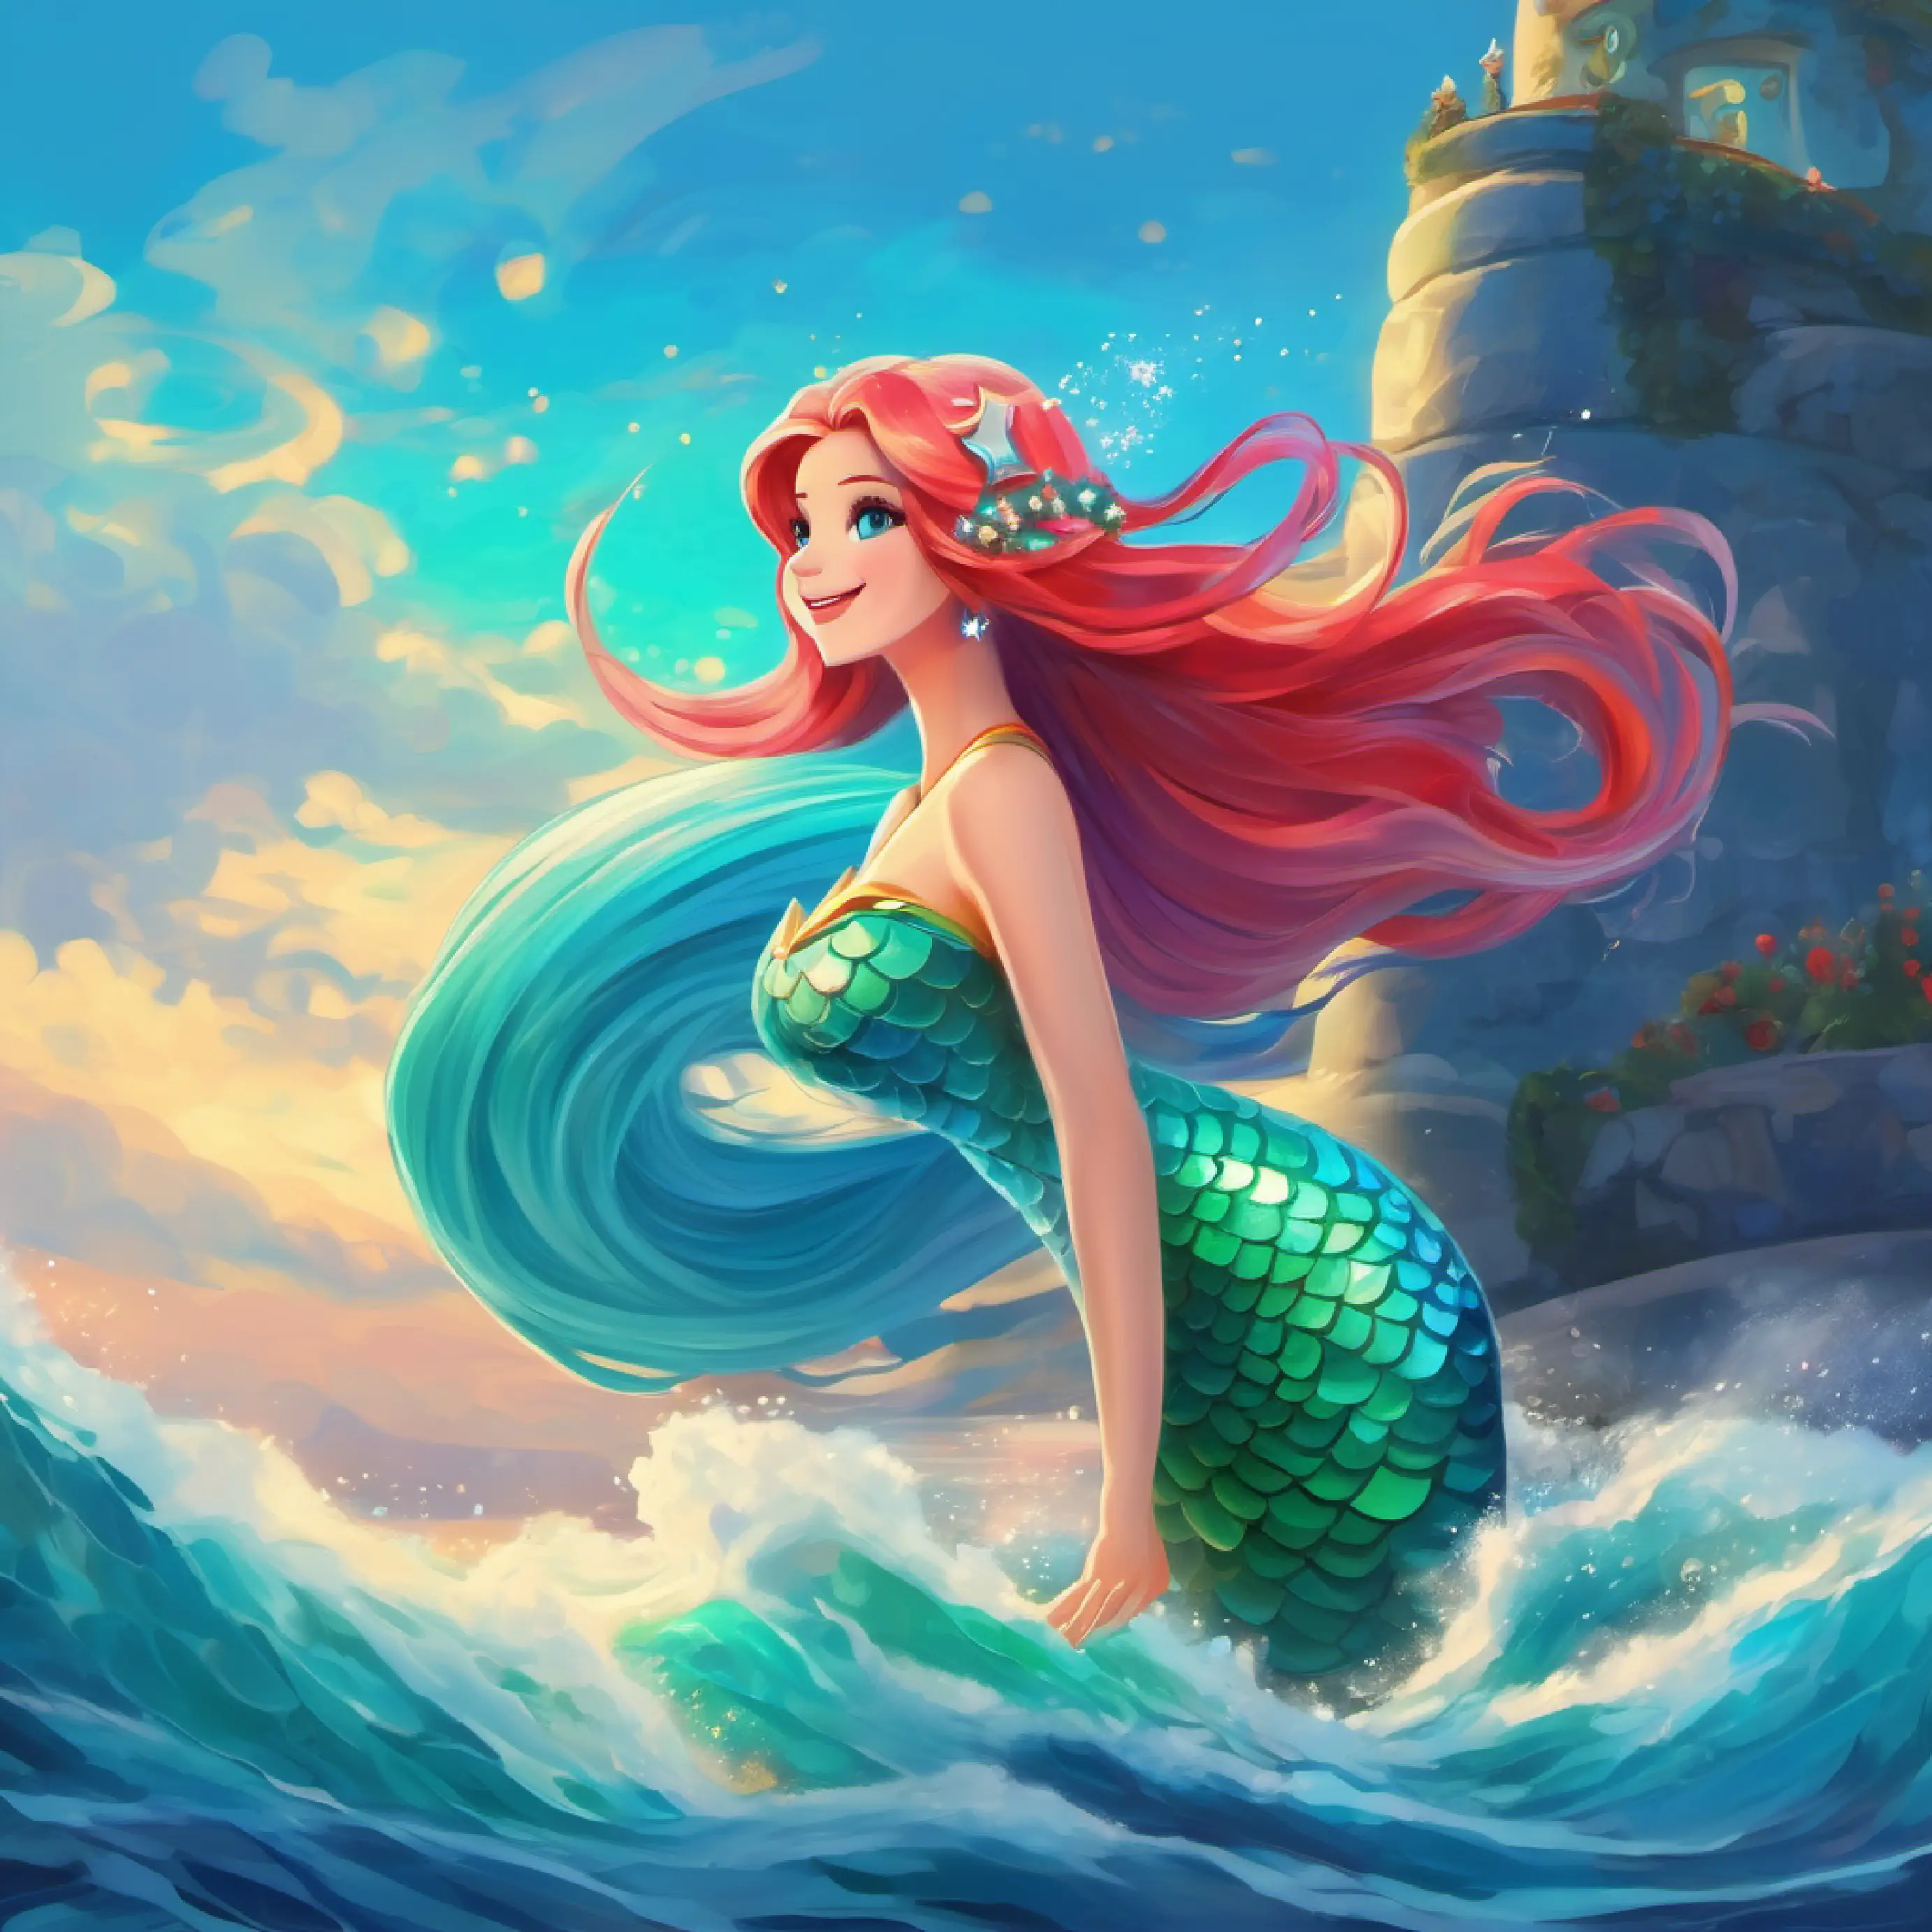 Mermaid princess with sky-blue tail and long aqua hair heads upward for a new adventure above the sea.